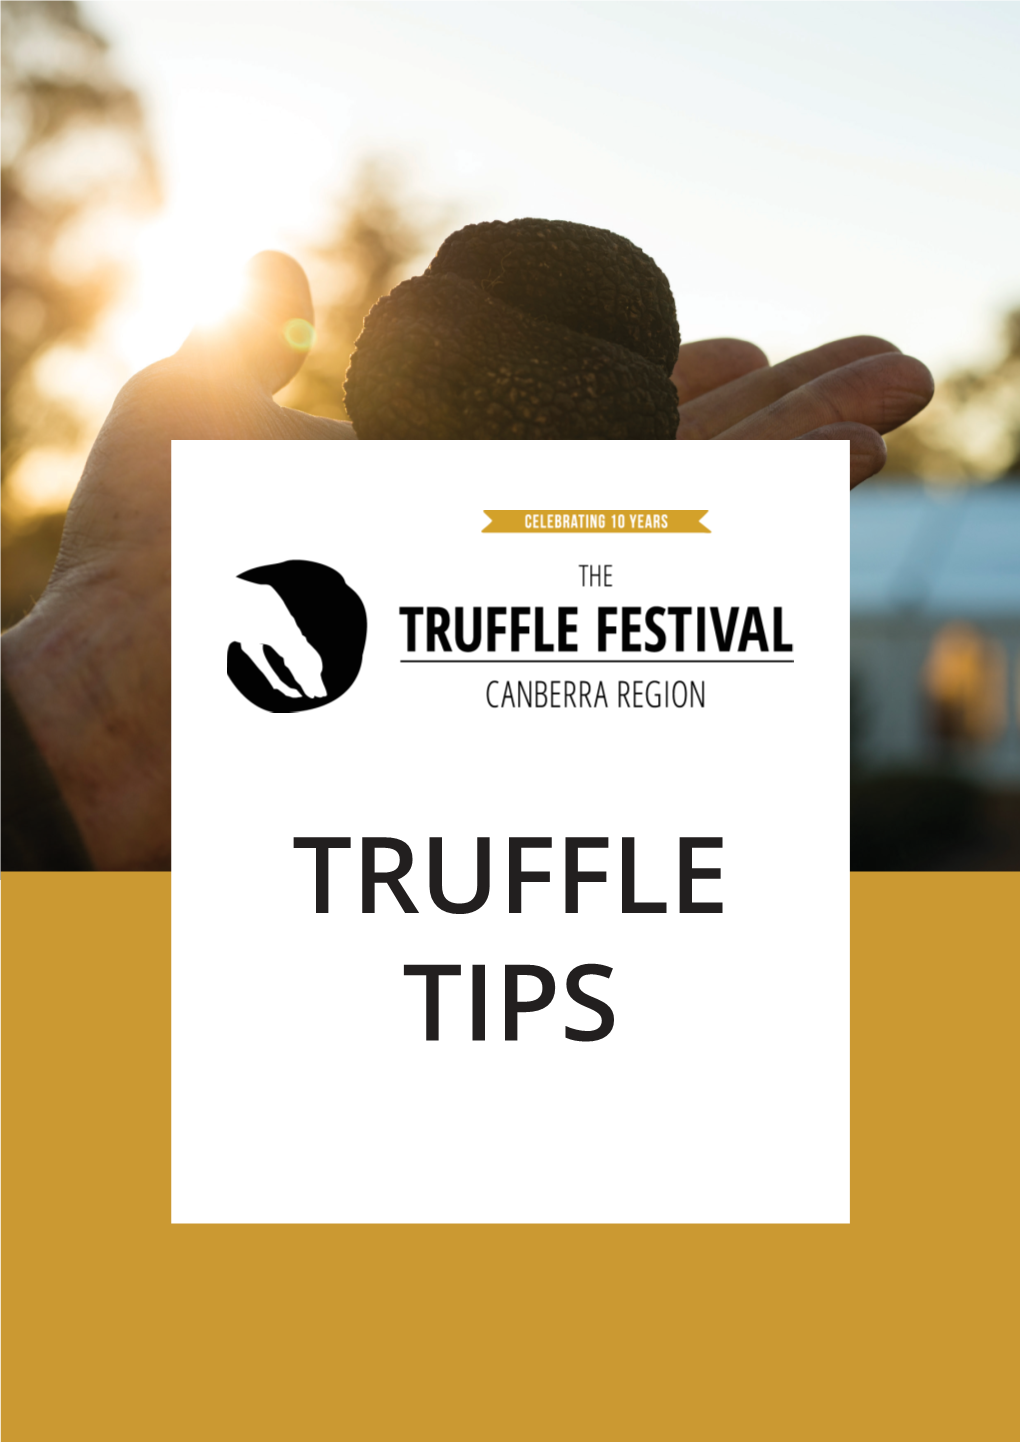 Truffle Tips About the Festival